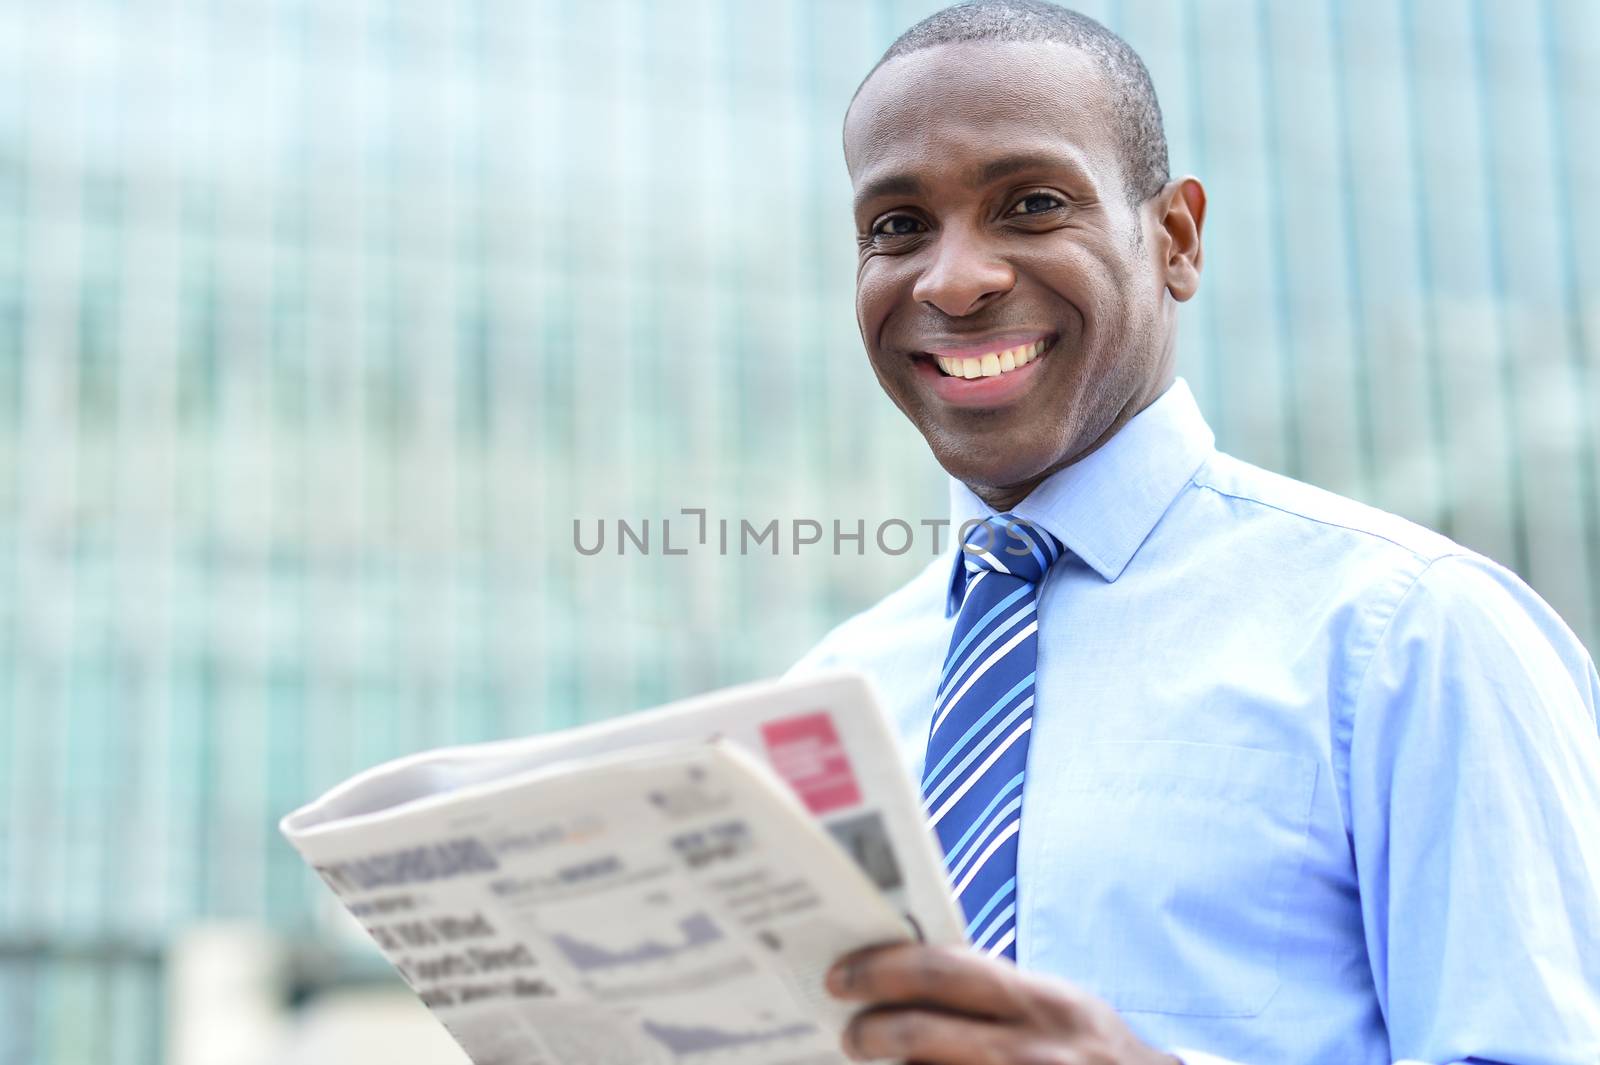 Corporate male smiling with magazine at outdoors